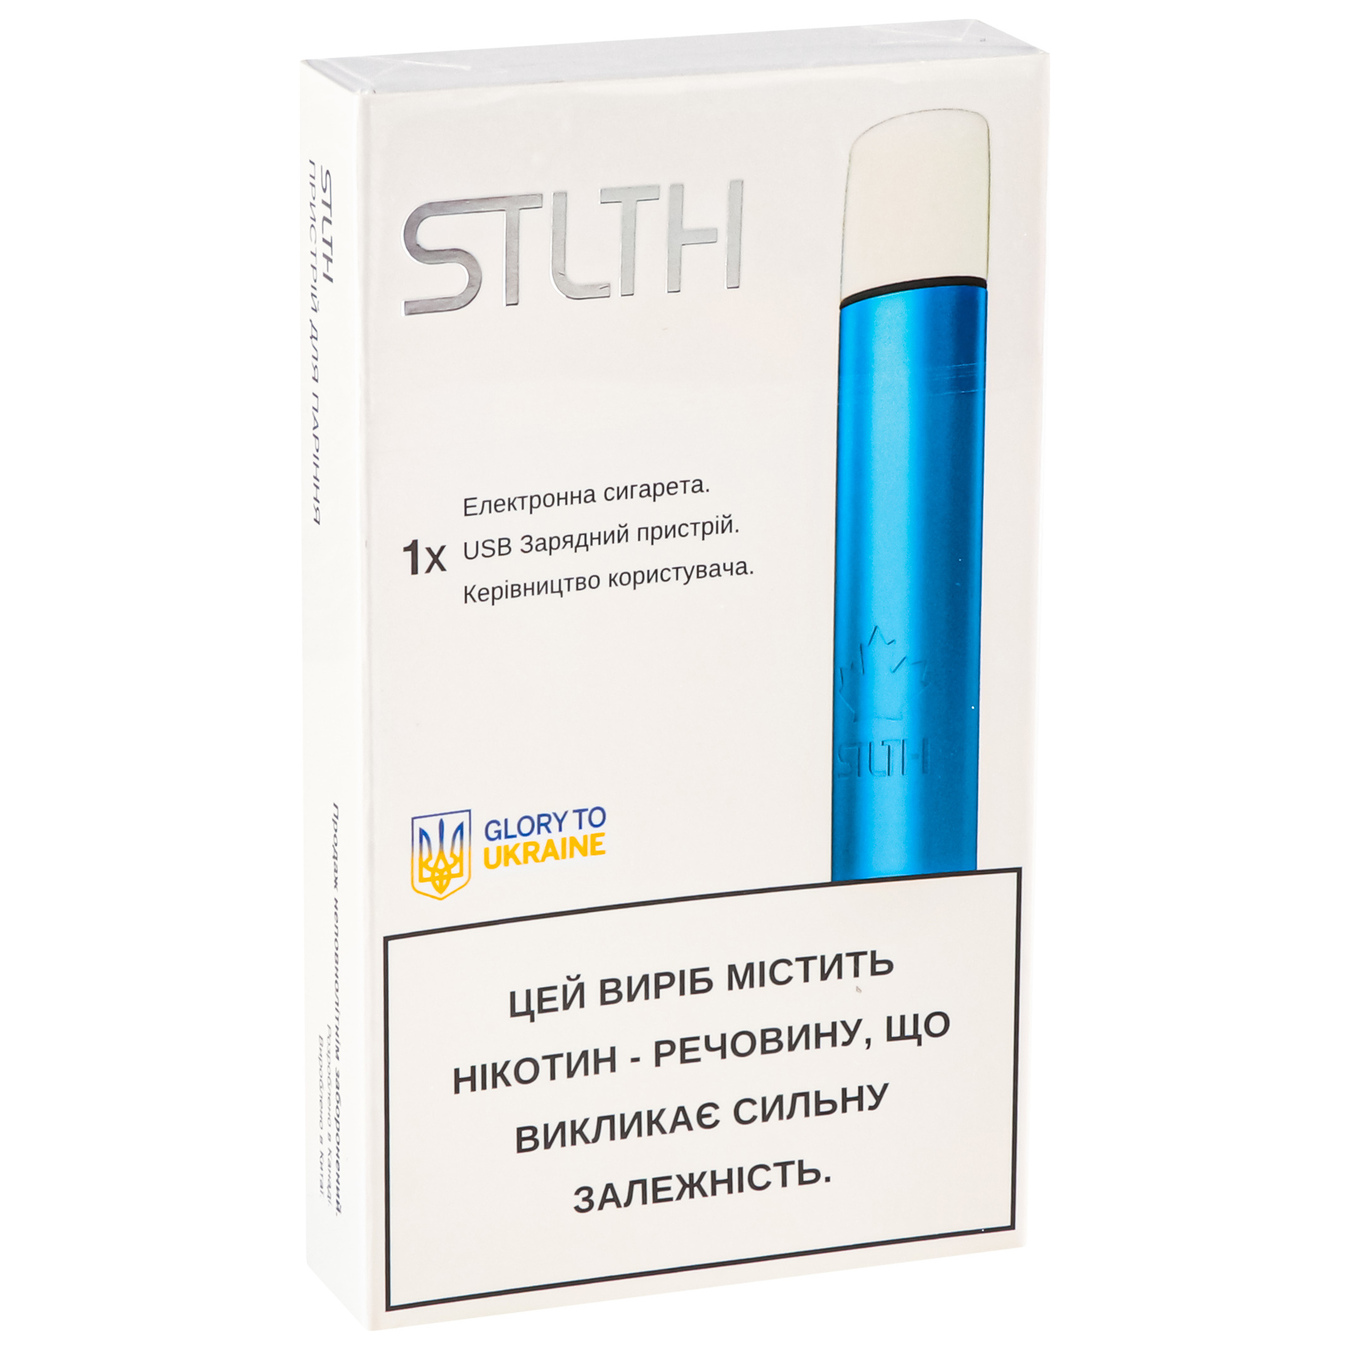 Vaporizer STLTH Blue Metal electronic reusable (the price is without excise tax) 2